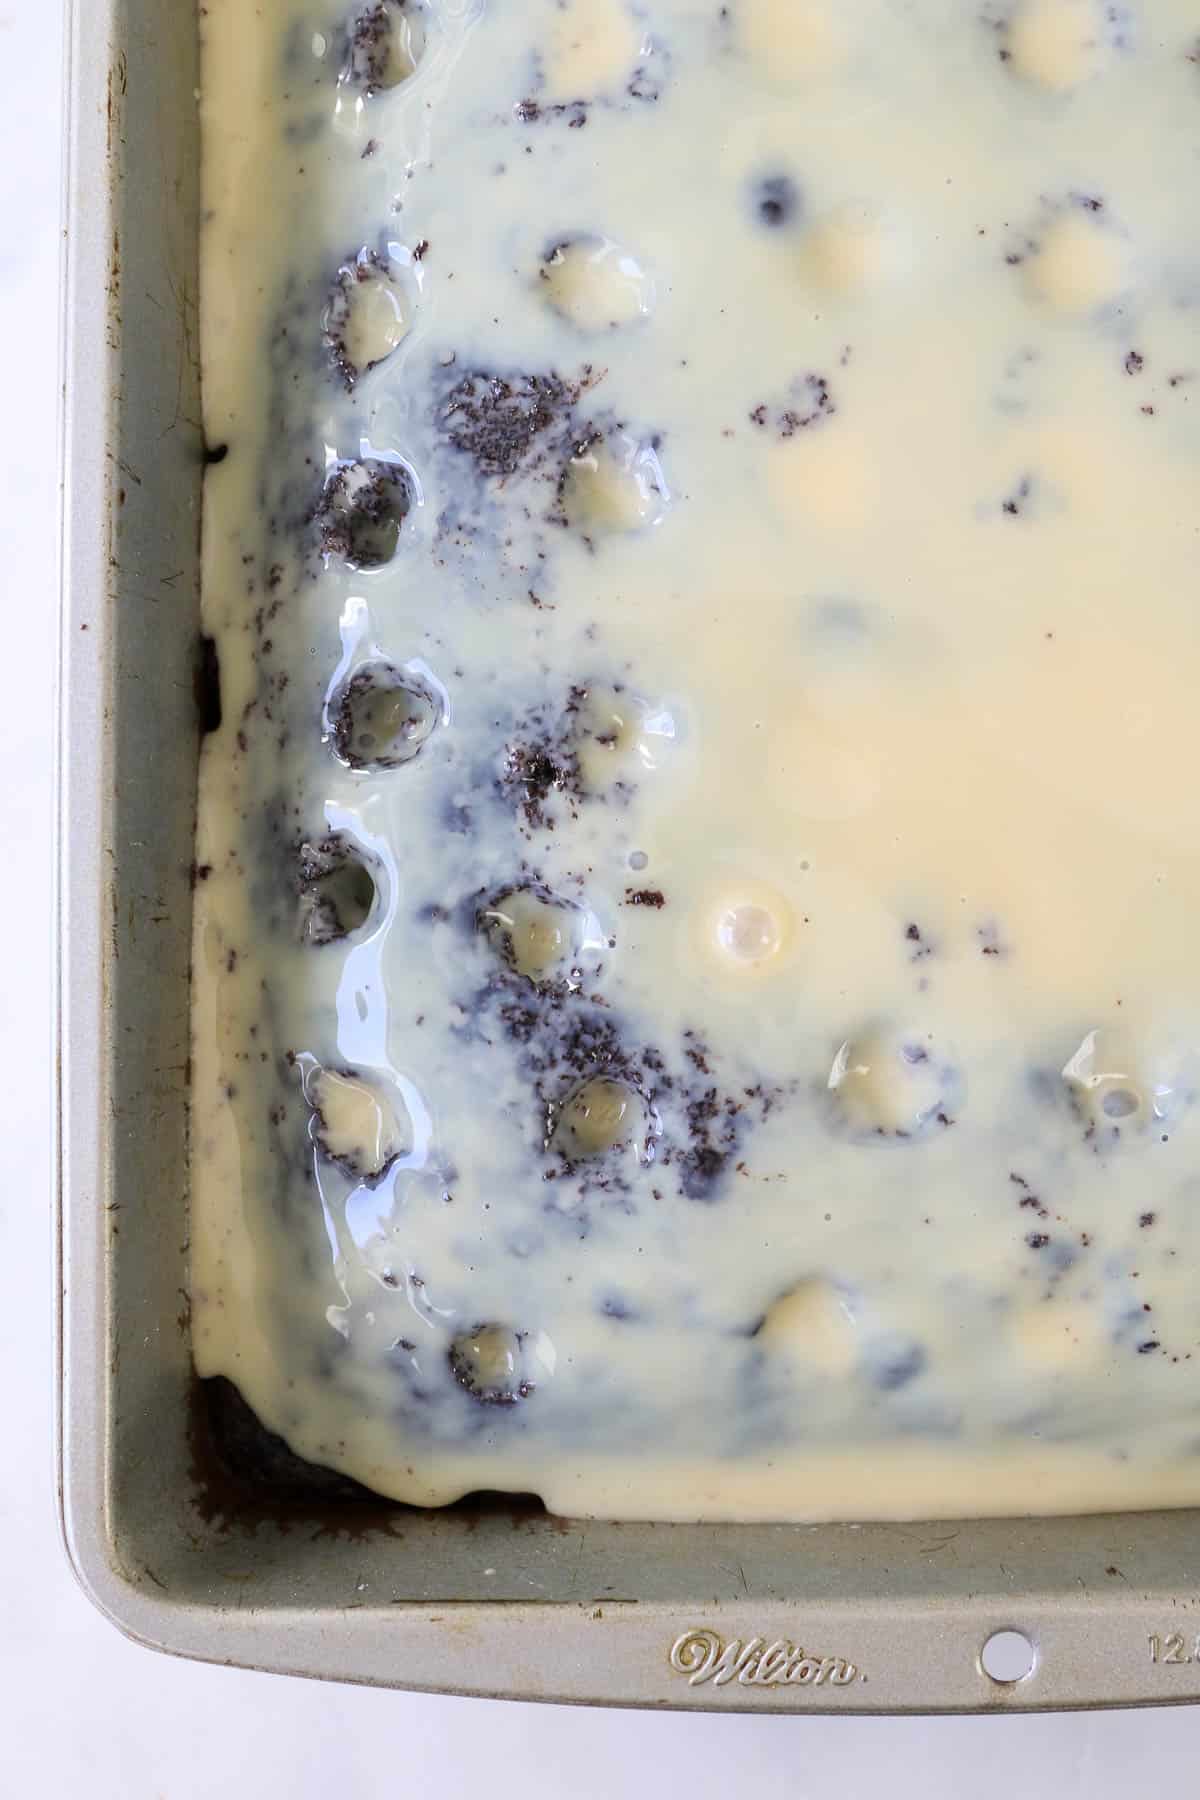 A close up of a chocolate cake with holes poked in it and sweetened condensed milk over top